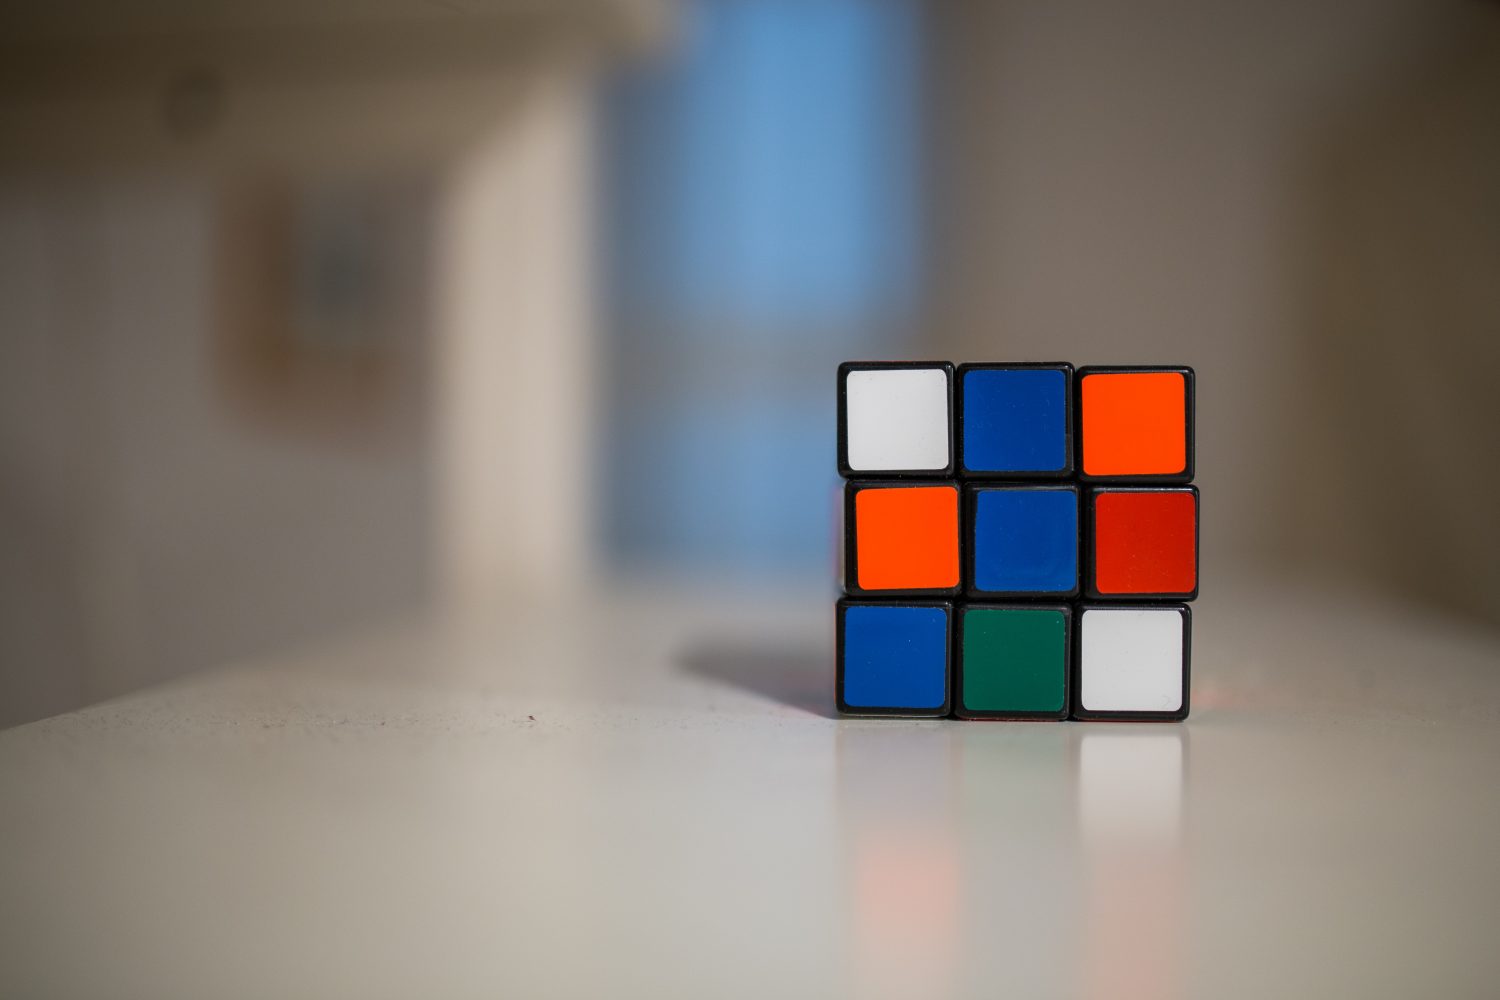 An unsolved Rubik's cube